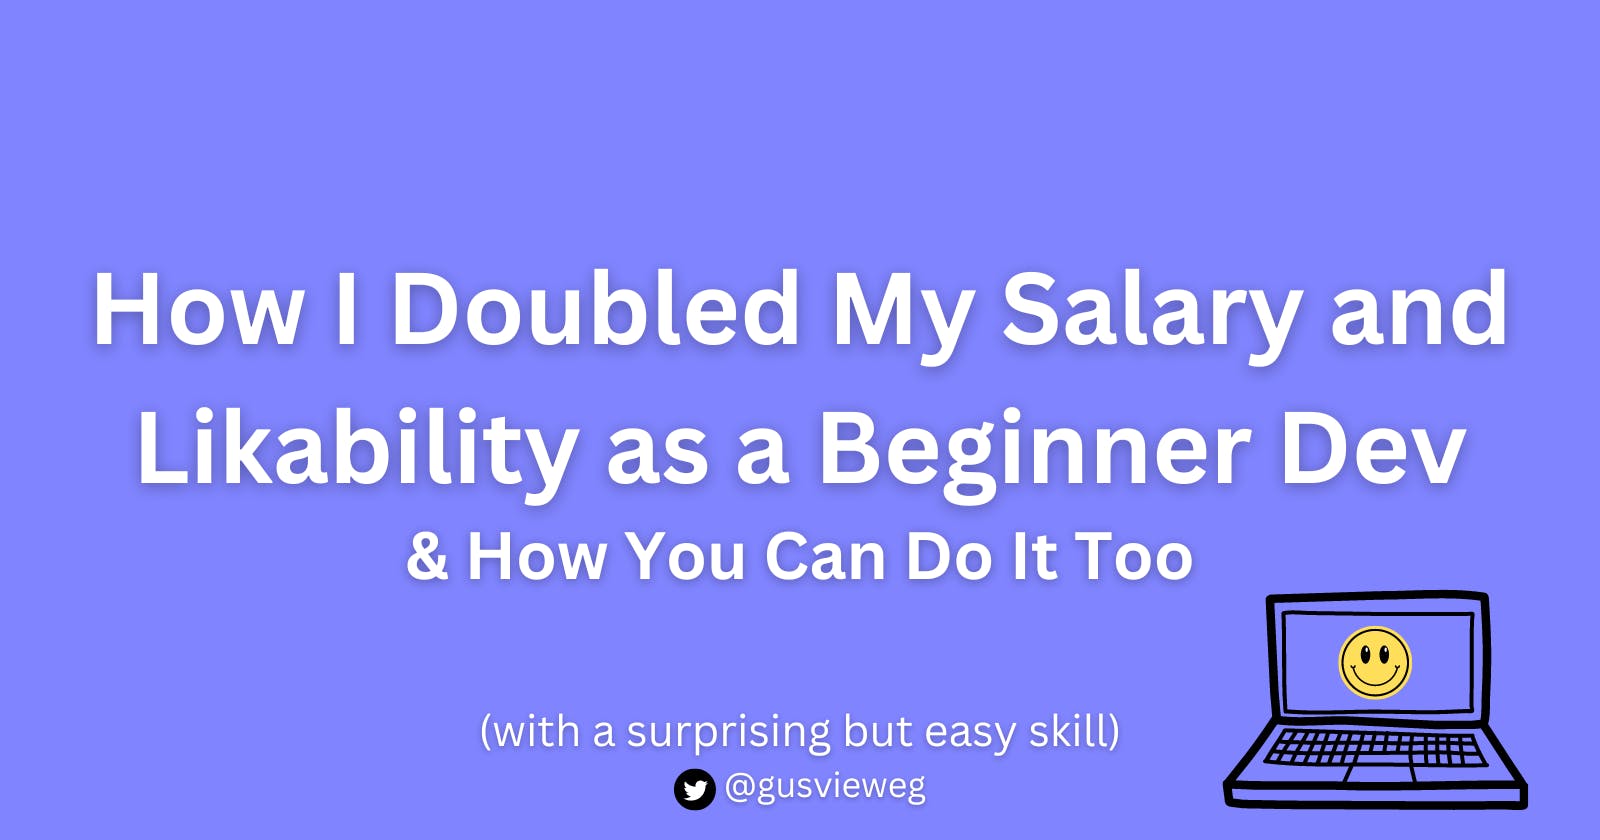 I Doubled My Salary and Likability as a Beginner Dev & How You Can Do It Too